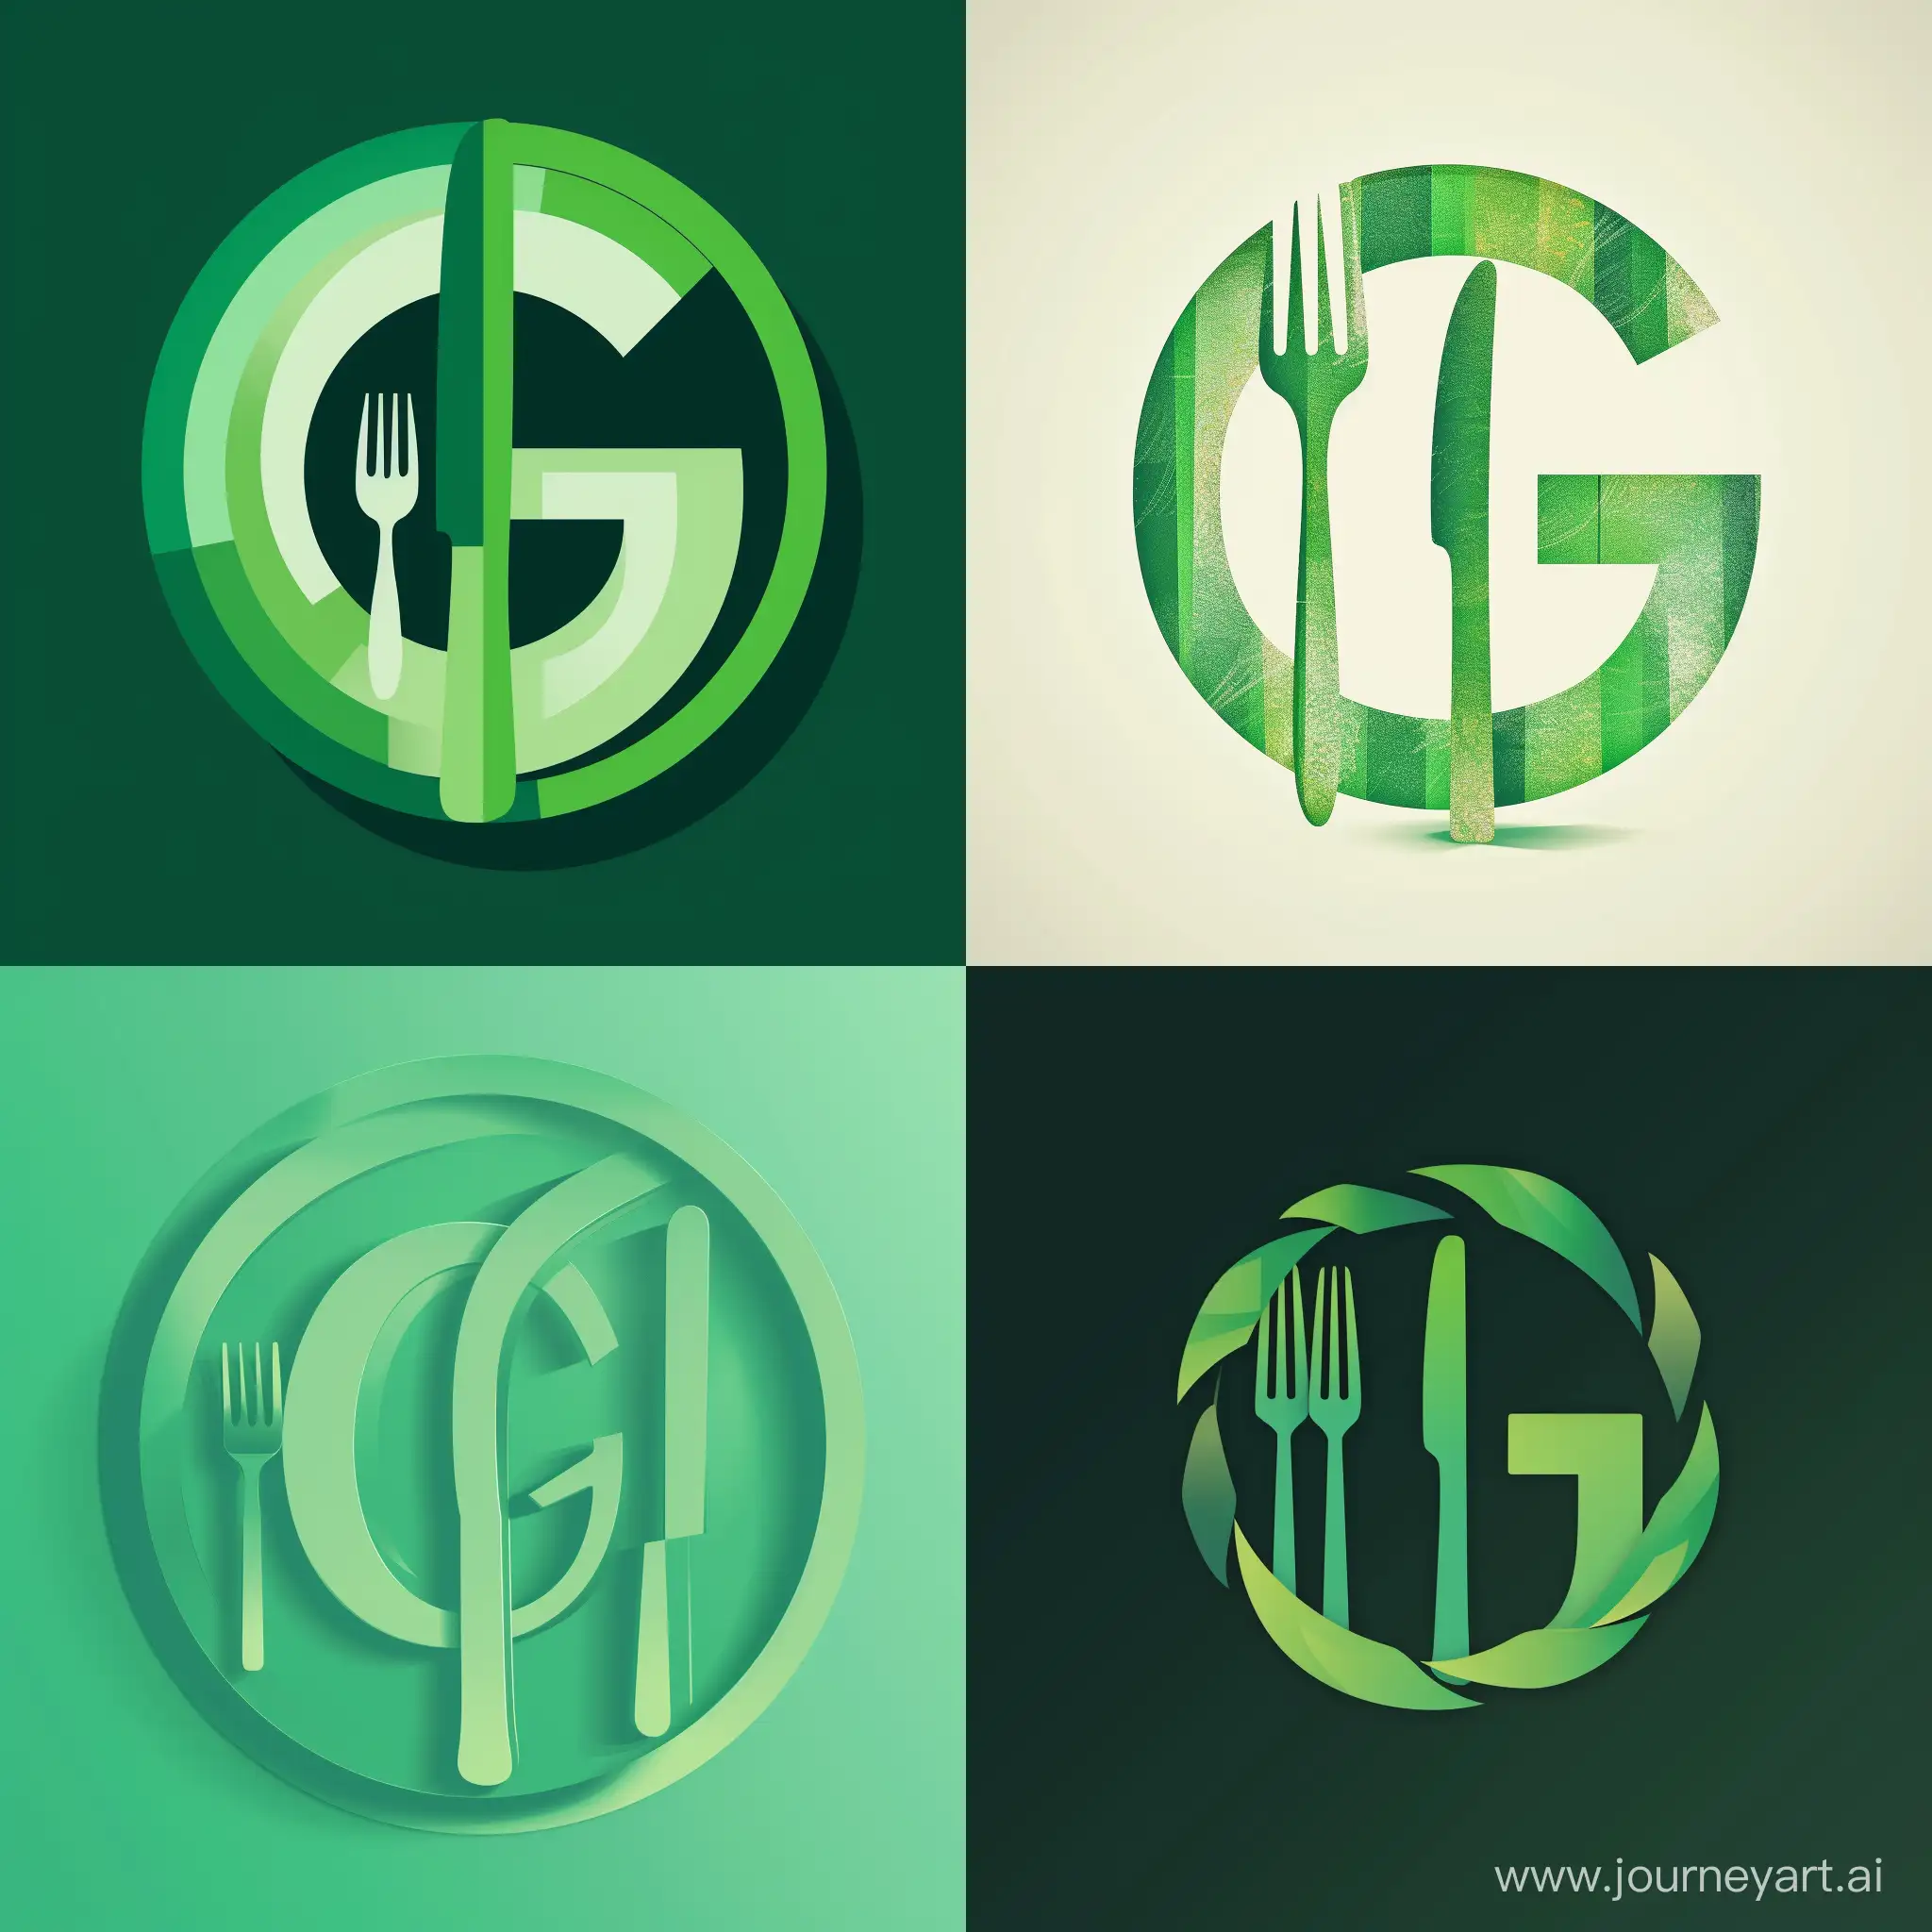 (overlapping I and G in a circular pattern), (fresh green color), (subtle fork and knife integration), (clean lines), (gradient effect)